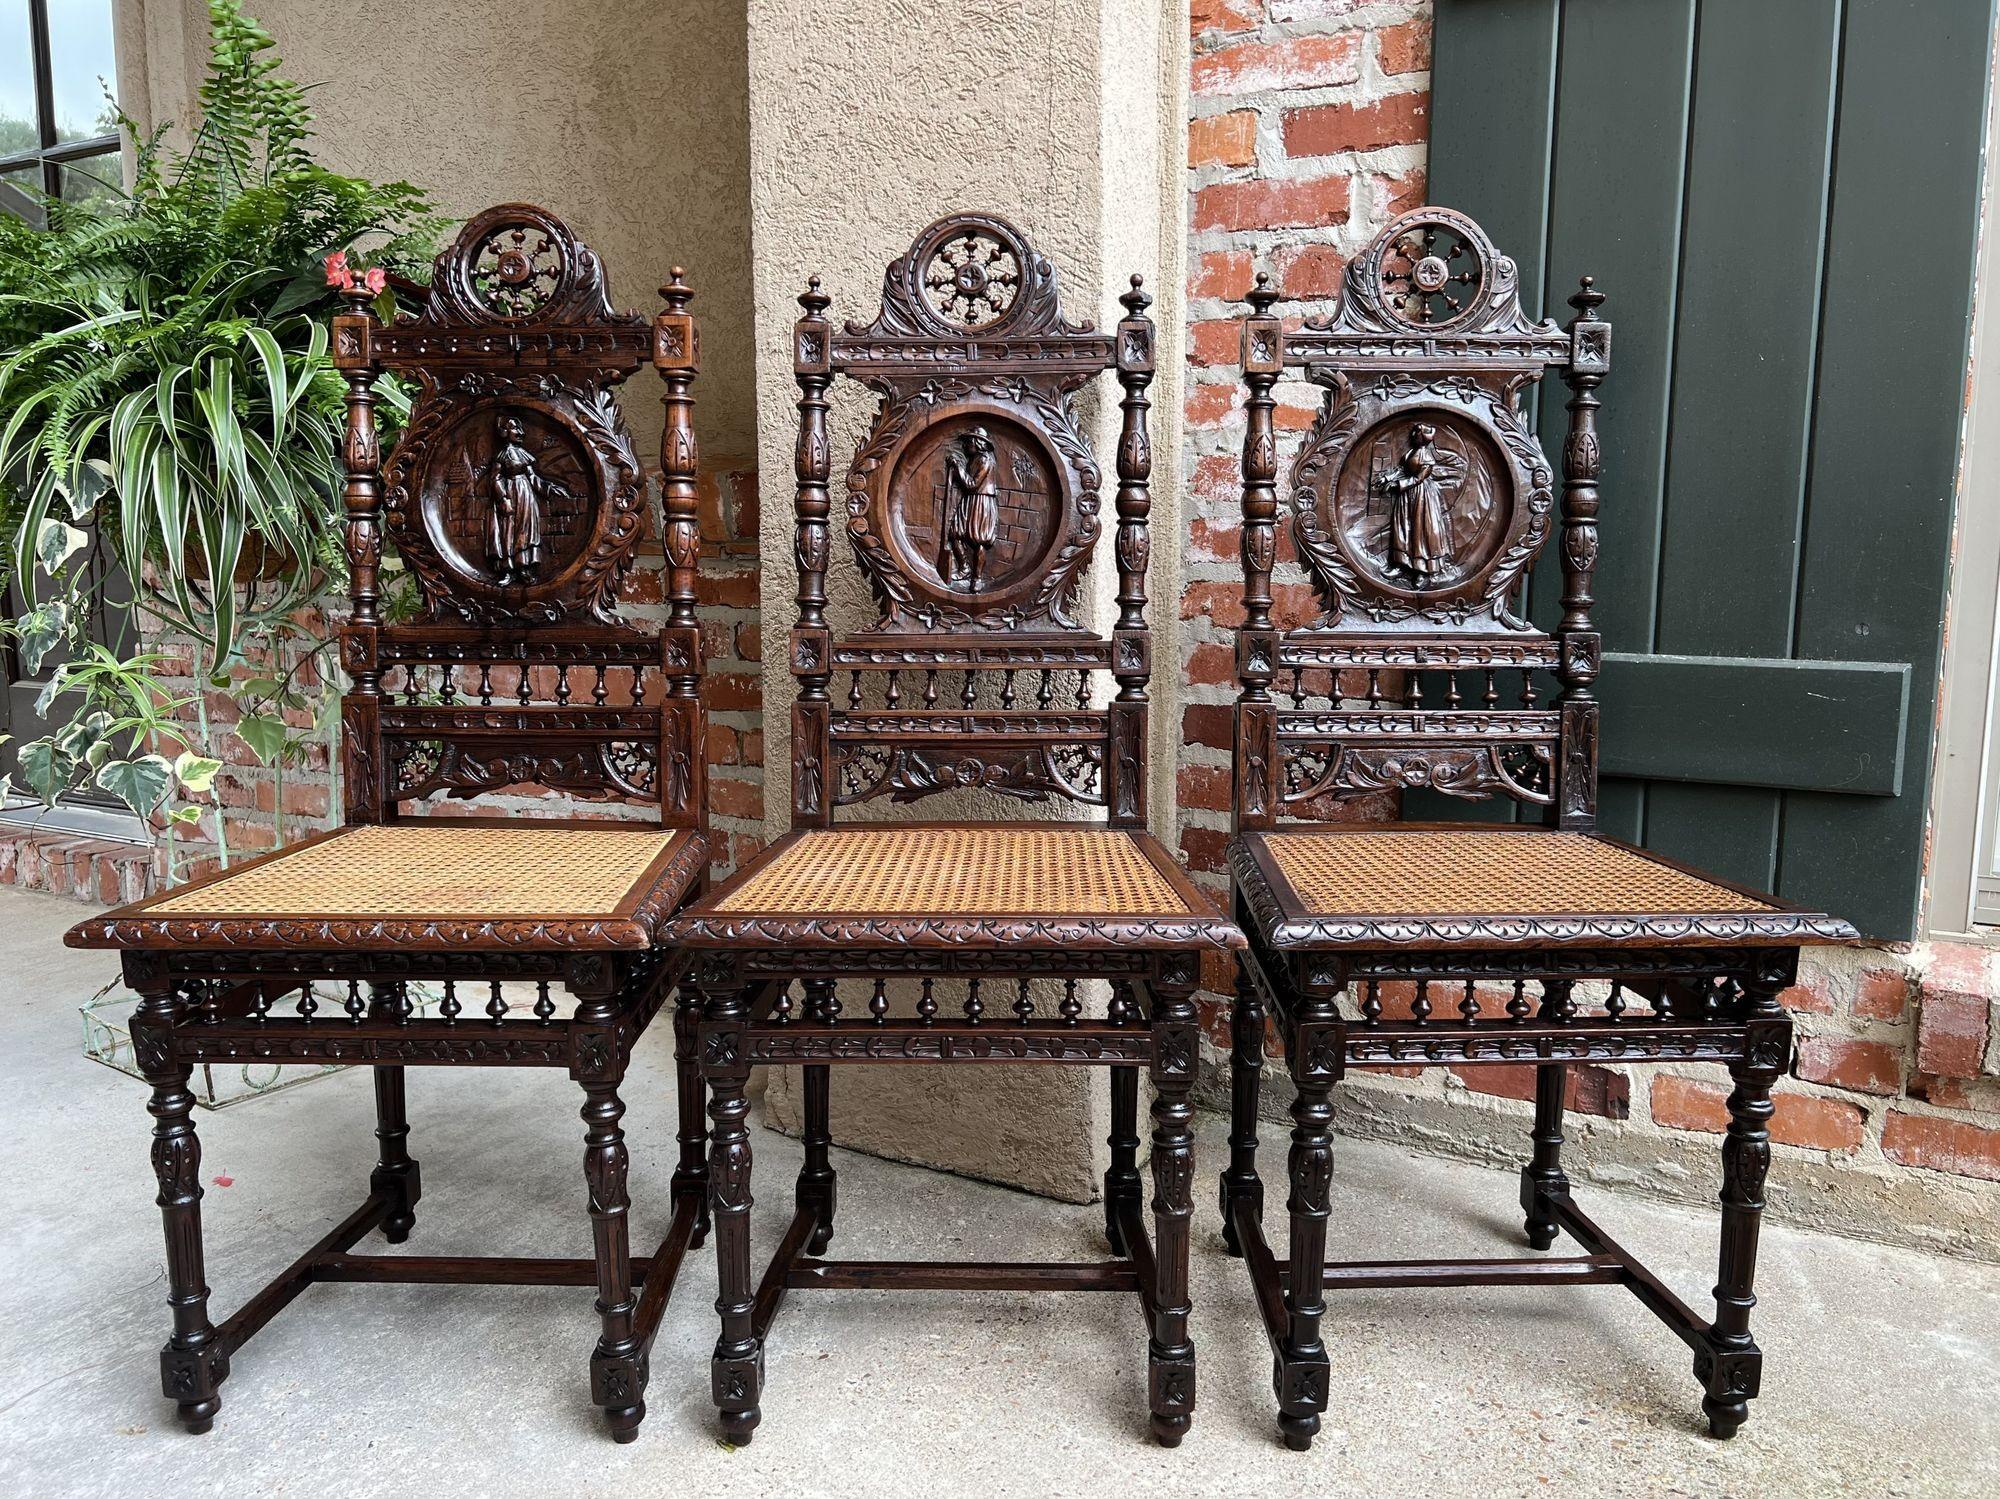 Set 5 Antique French carved oak dining side chairs breton brittany w cane seat.
 
Direct from France, a lovely set of 5 antique French Breton dining chairs with classic Brittany style, perfect for a kitchen or dining room with the darker finish